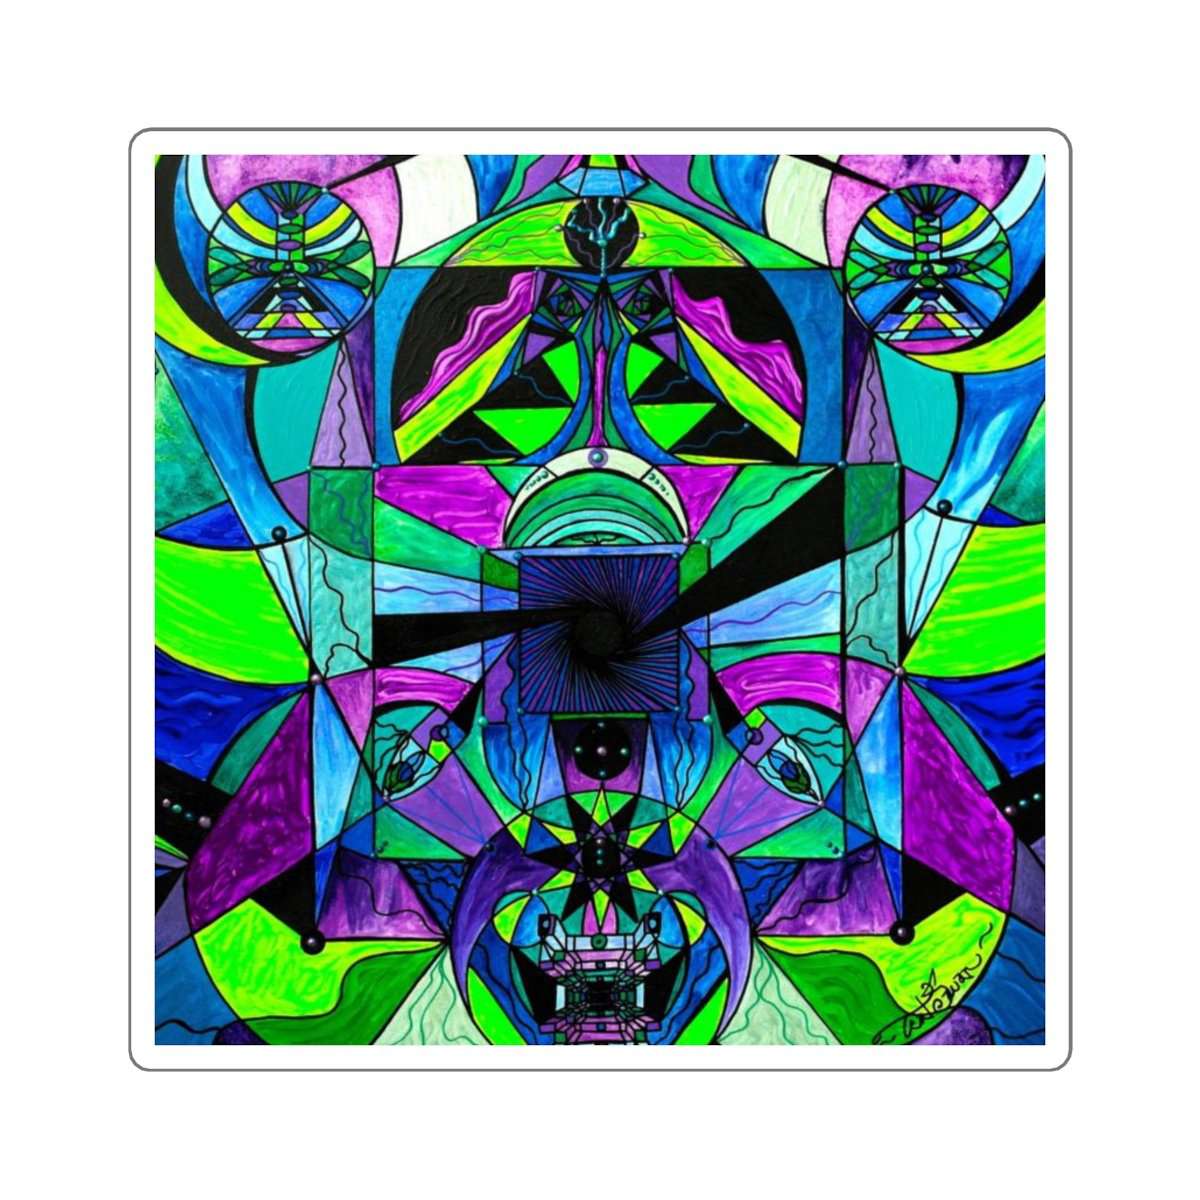 Arcturian Astral Travel Grid - Square Stickers